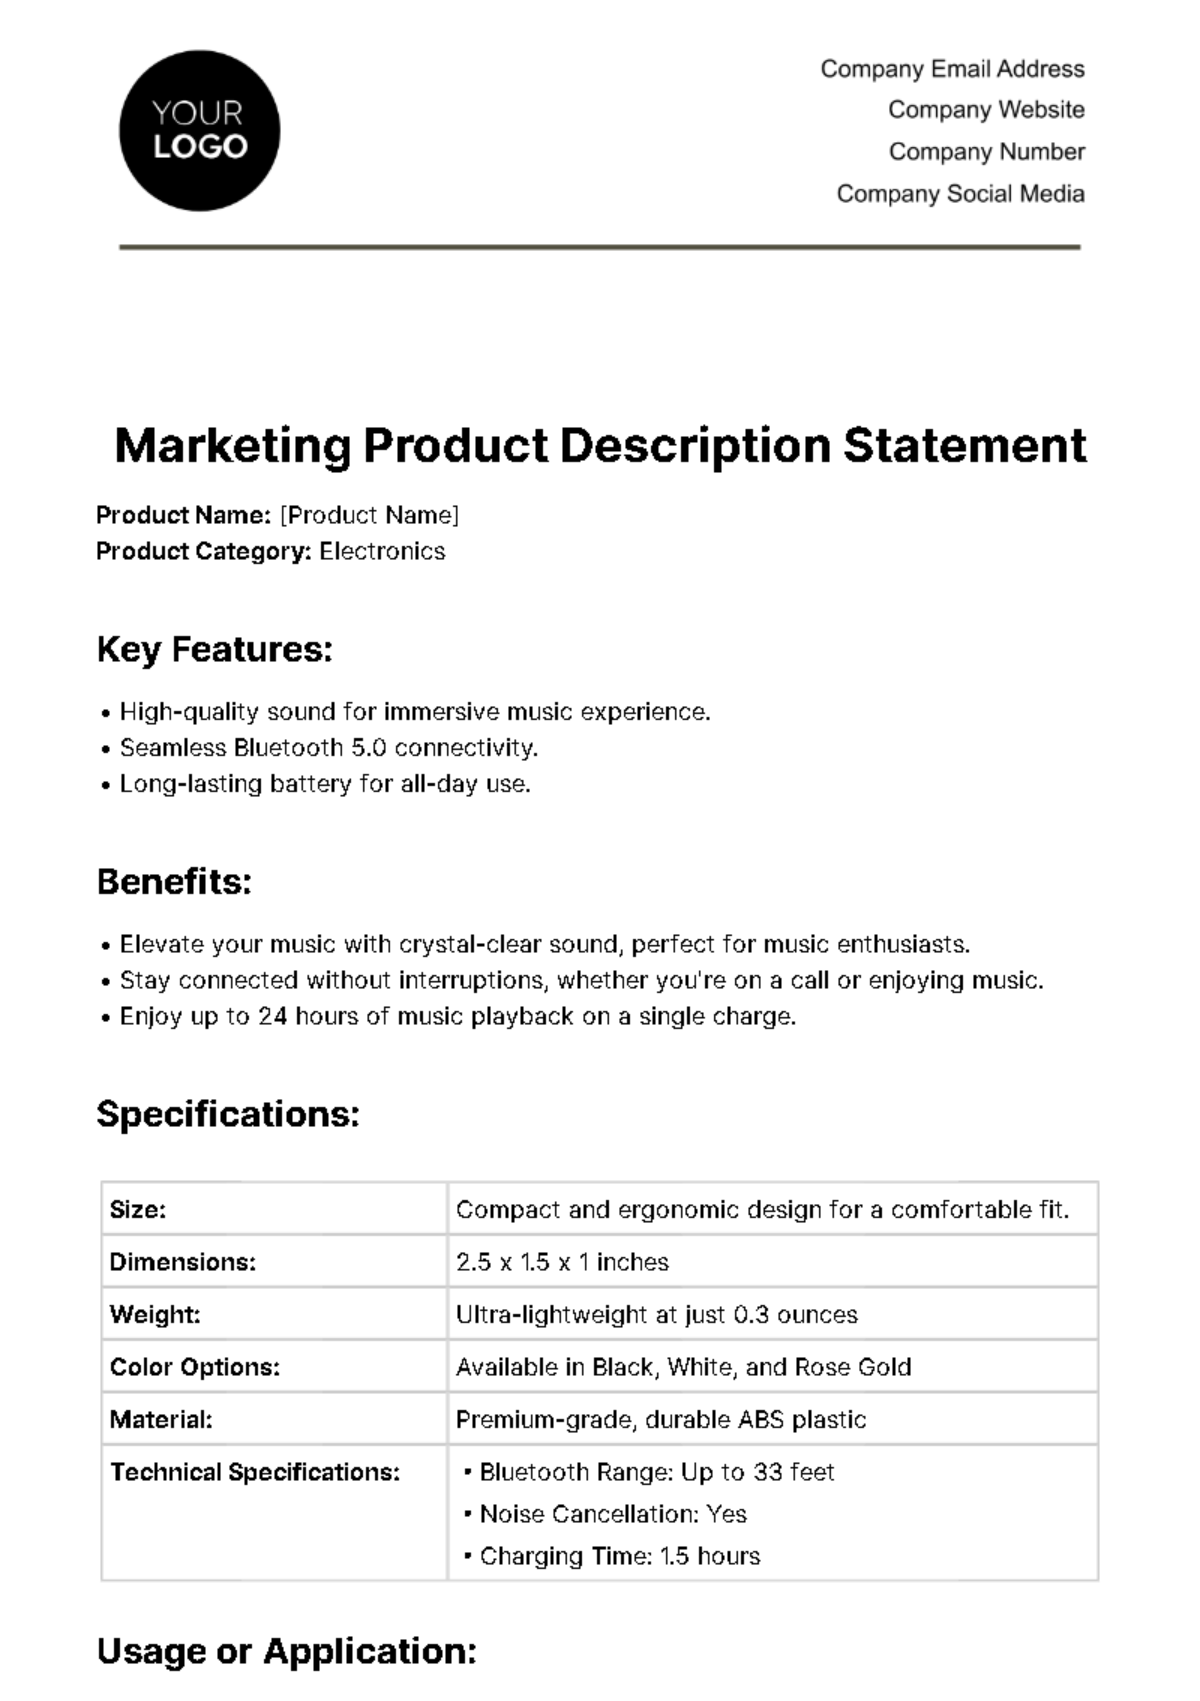 Marnketing Product Description Statement Template